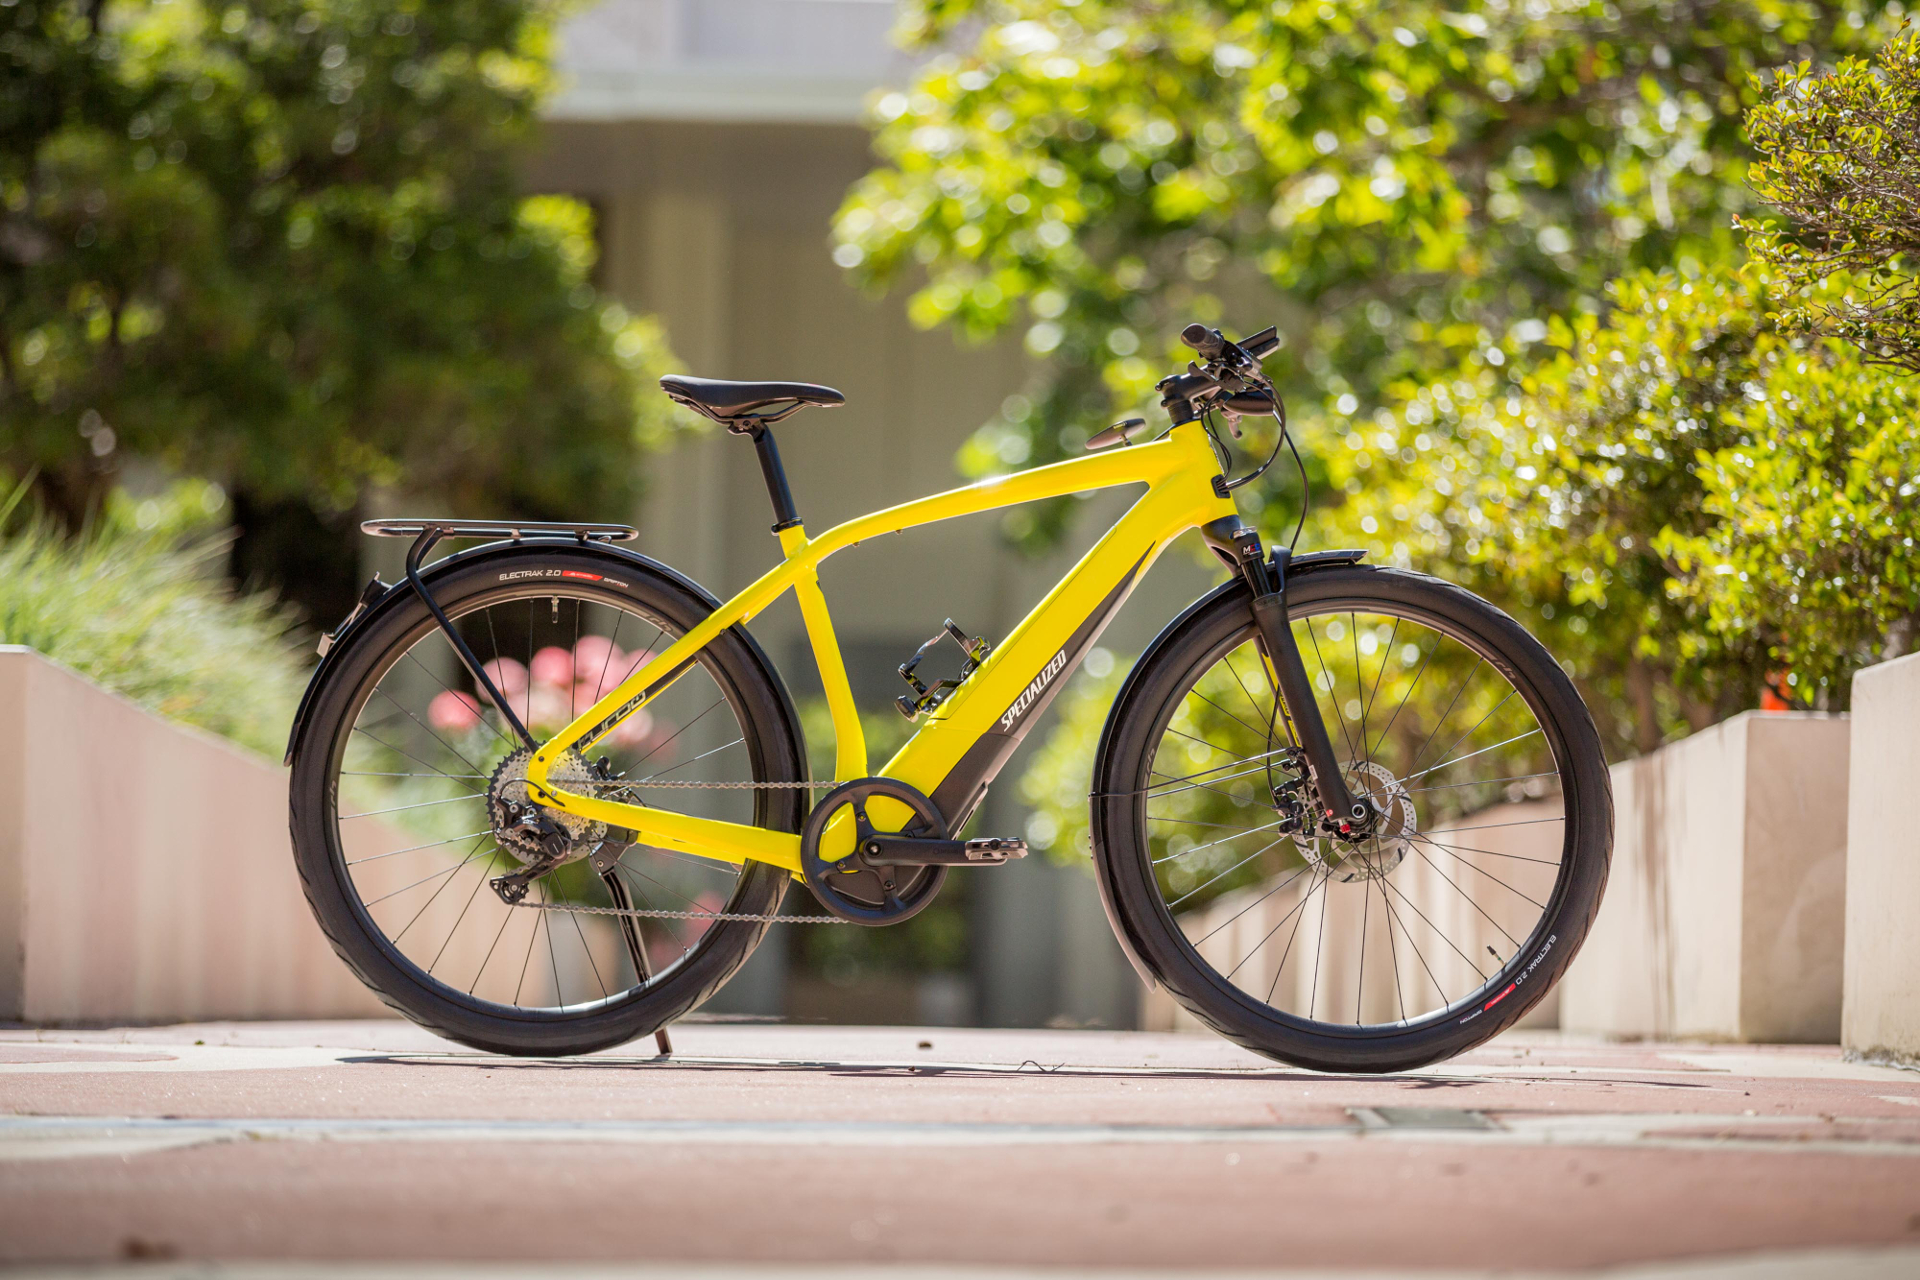 The Specialised Turbo Vado 6.0 Is The Most Fun Bicycle (Yes, Bicycle) You Can Spend $6000 On